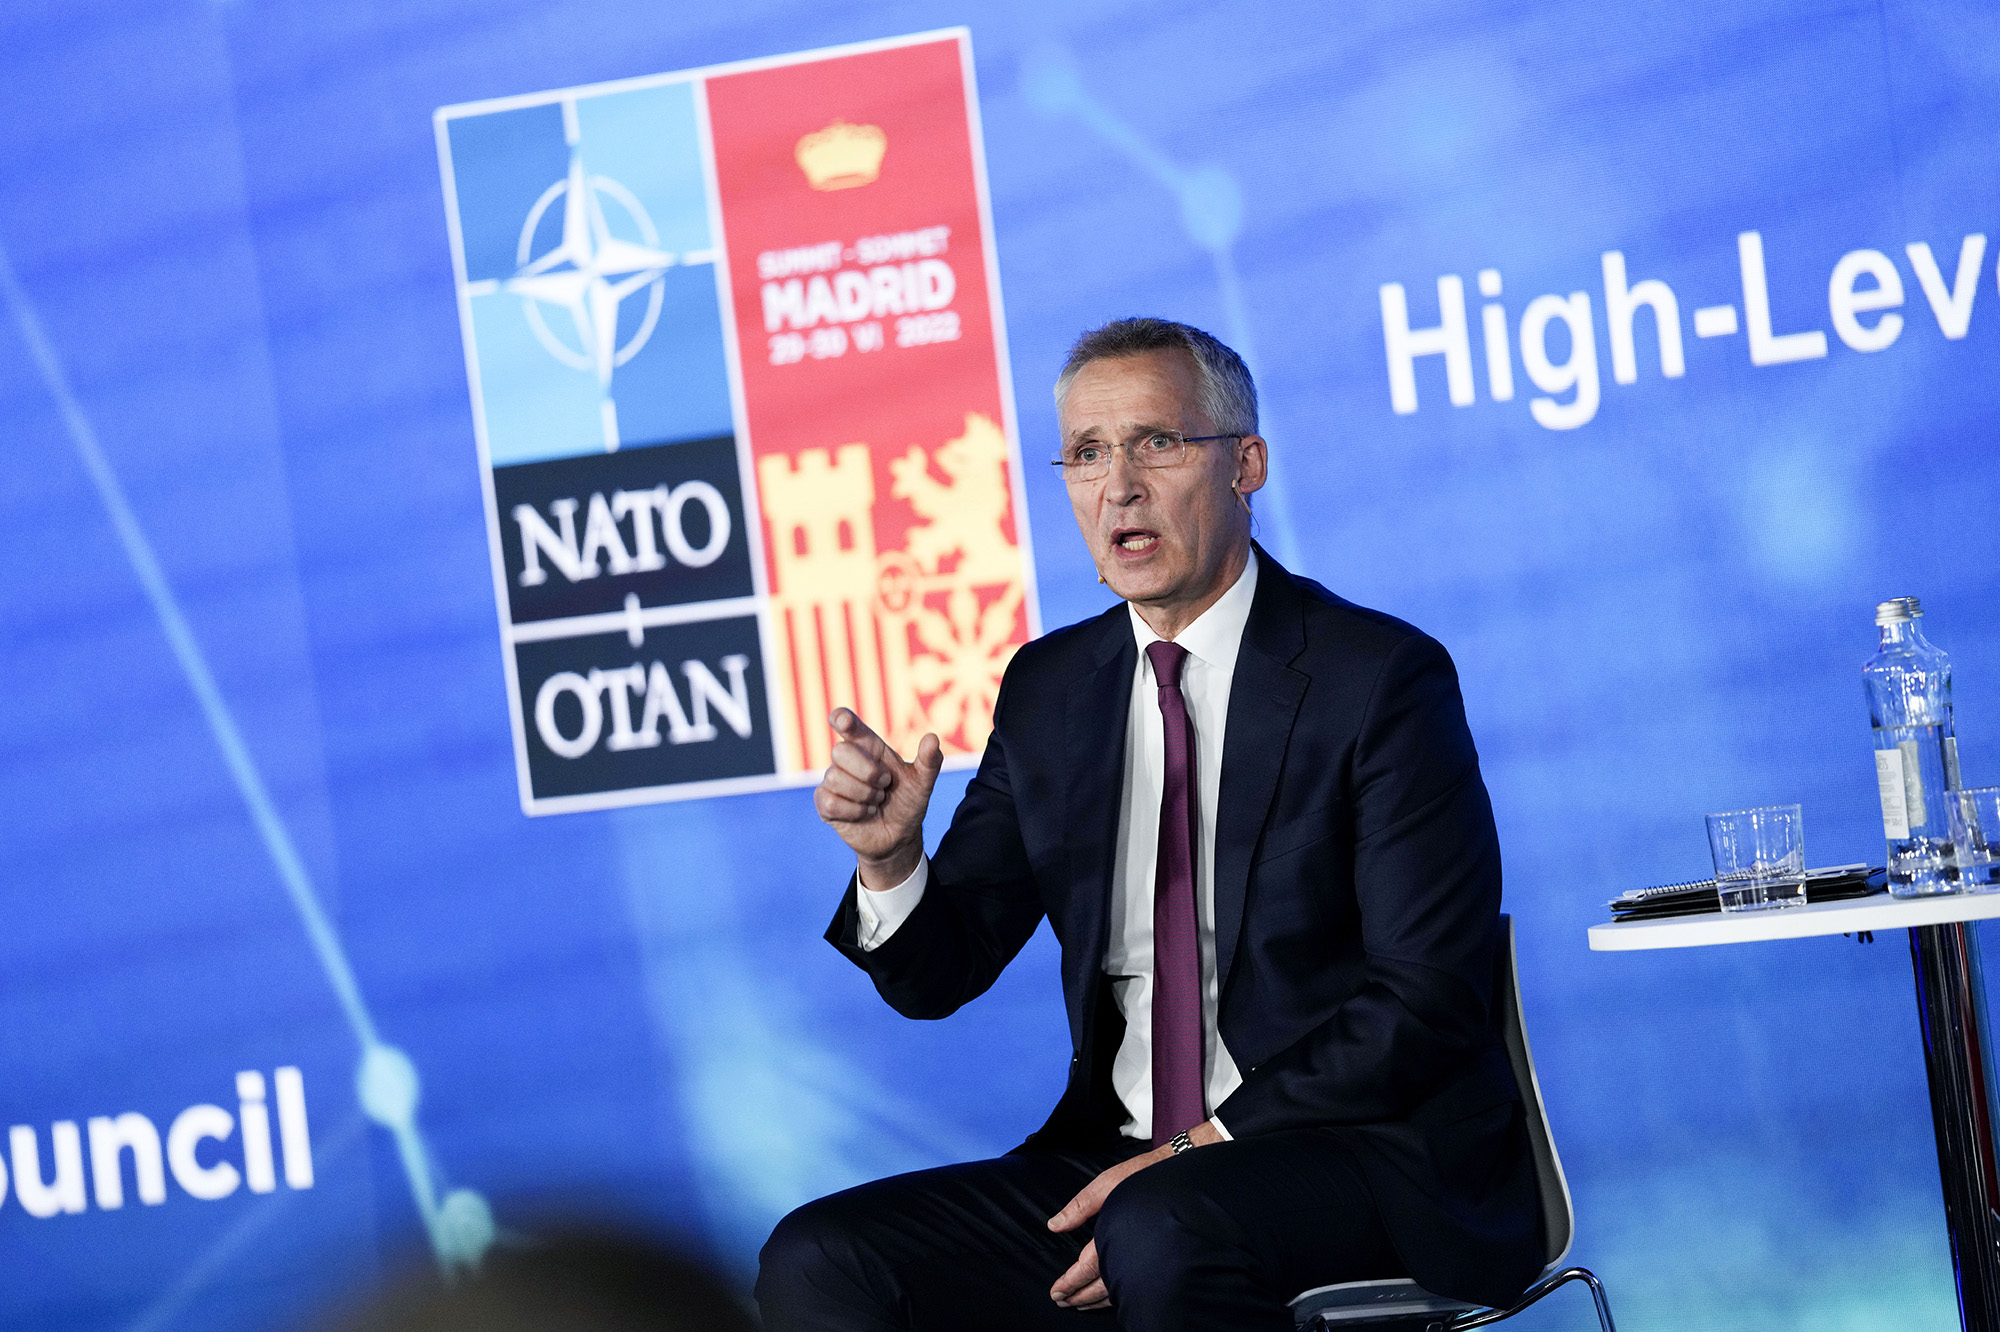 NATO Secretary General Jens Stoltenberg speaks at the NATO public forum during a NATO summit in Madrid, Spain, on June 28.